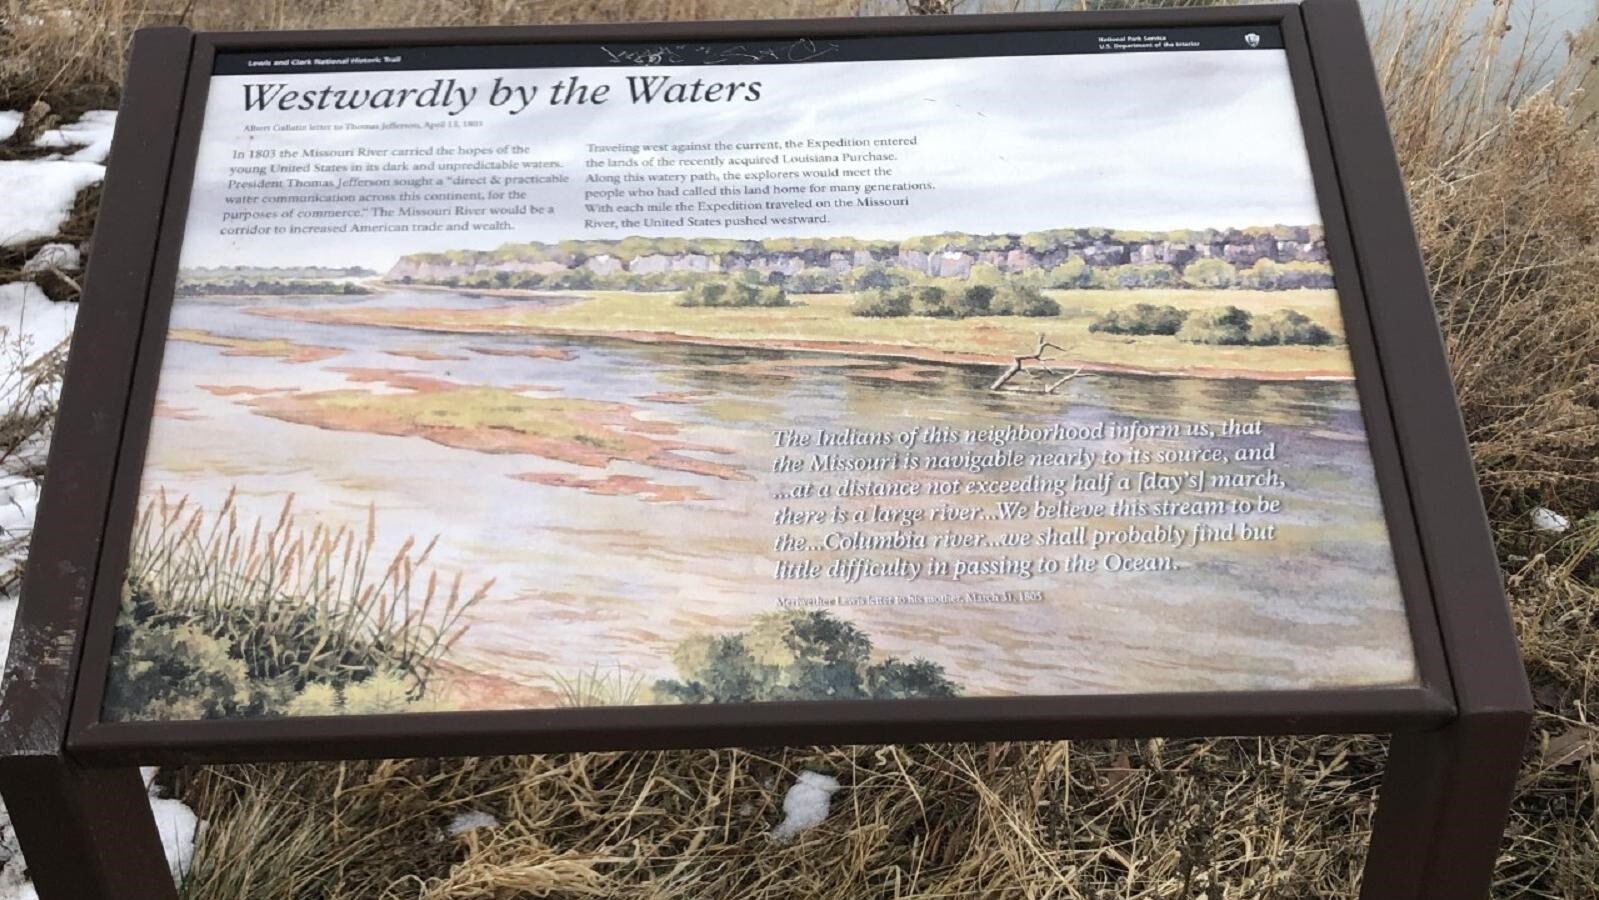 Westwardly by the Waters interpretive panel